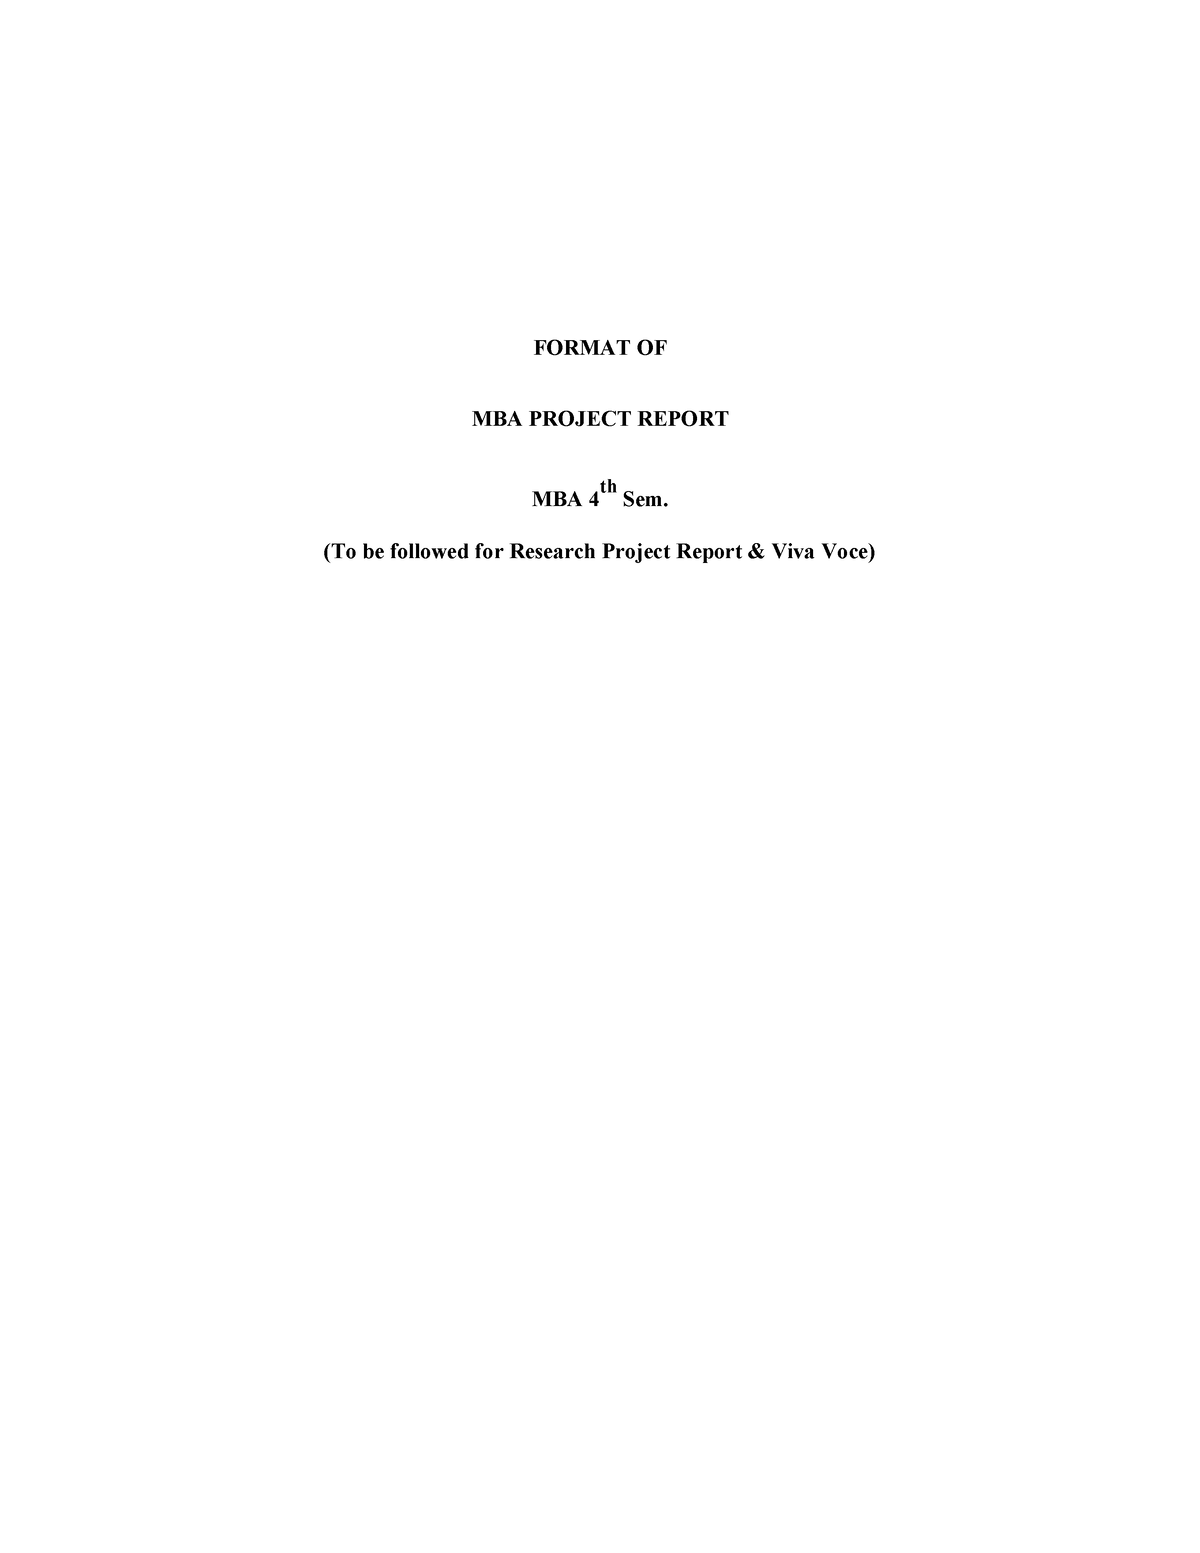 MBA Project format - FORMAT OF MBA PROJECT REPORT MBA 4 th Sem. (To be